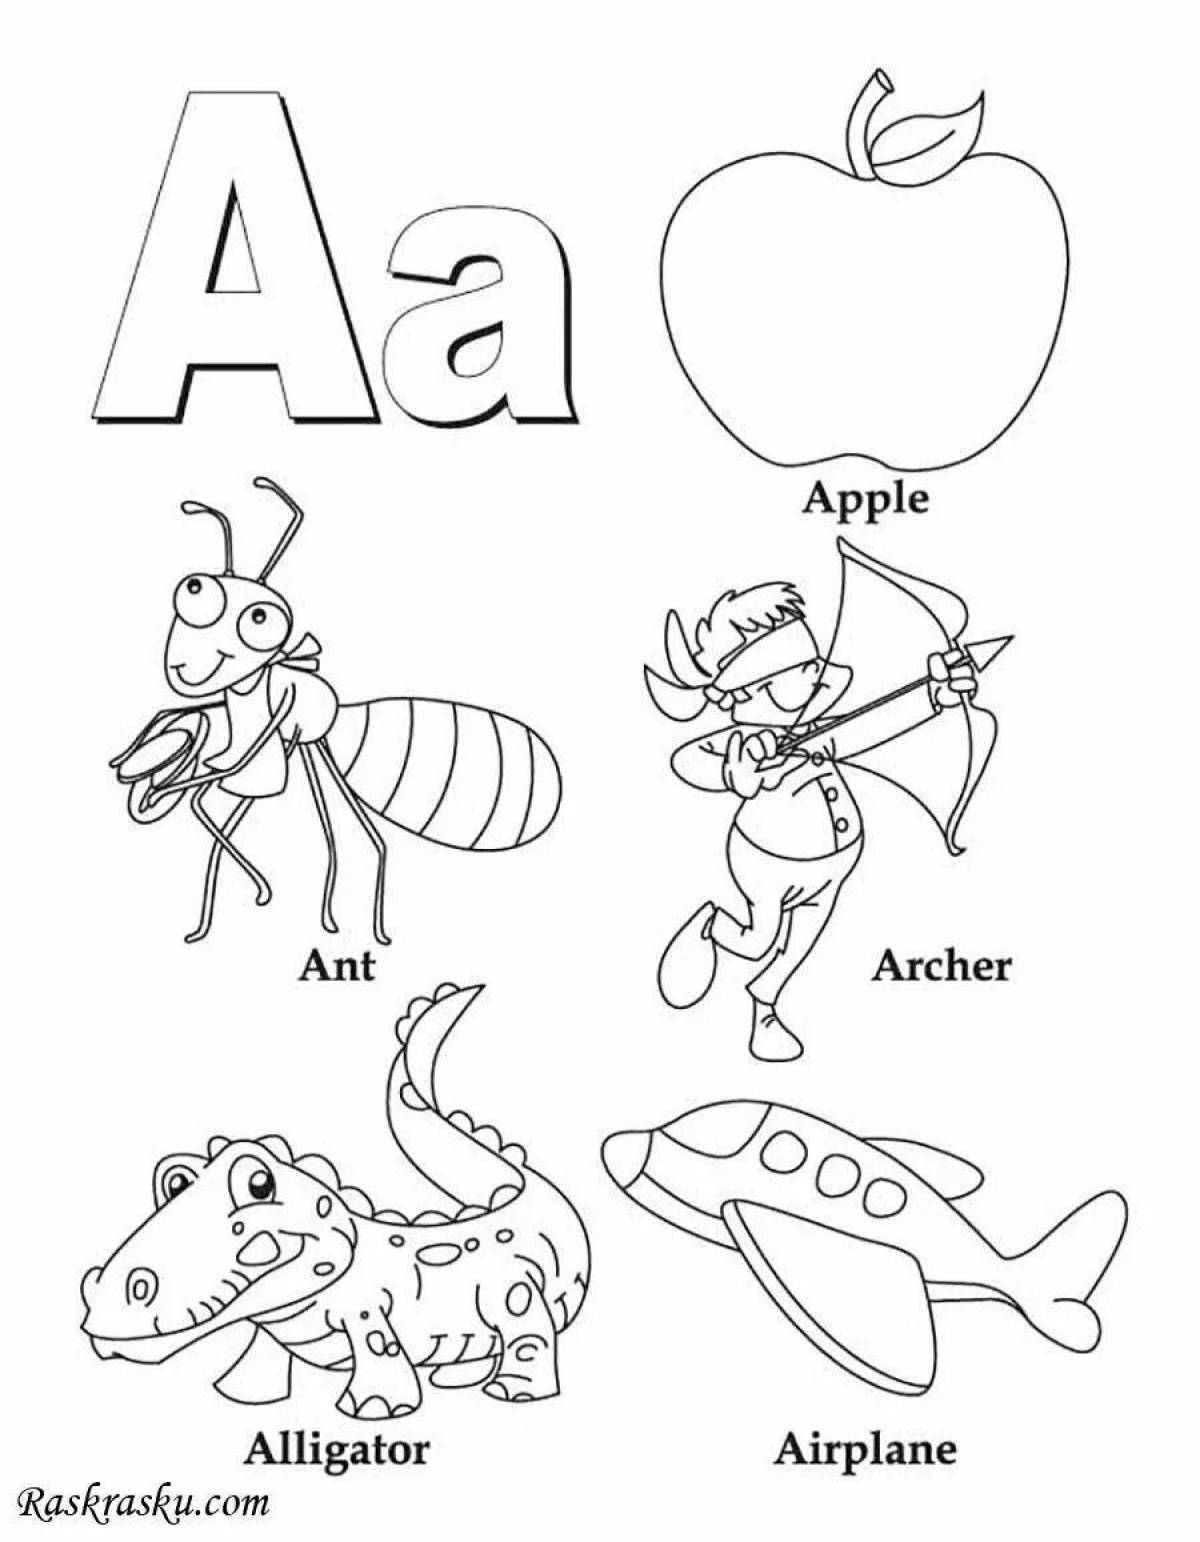 Colorful english letters coloring page for little dreamers